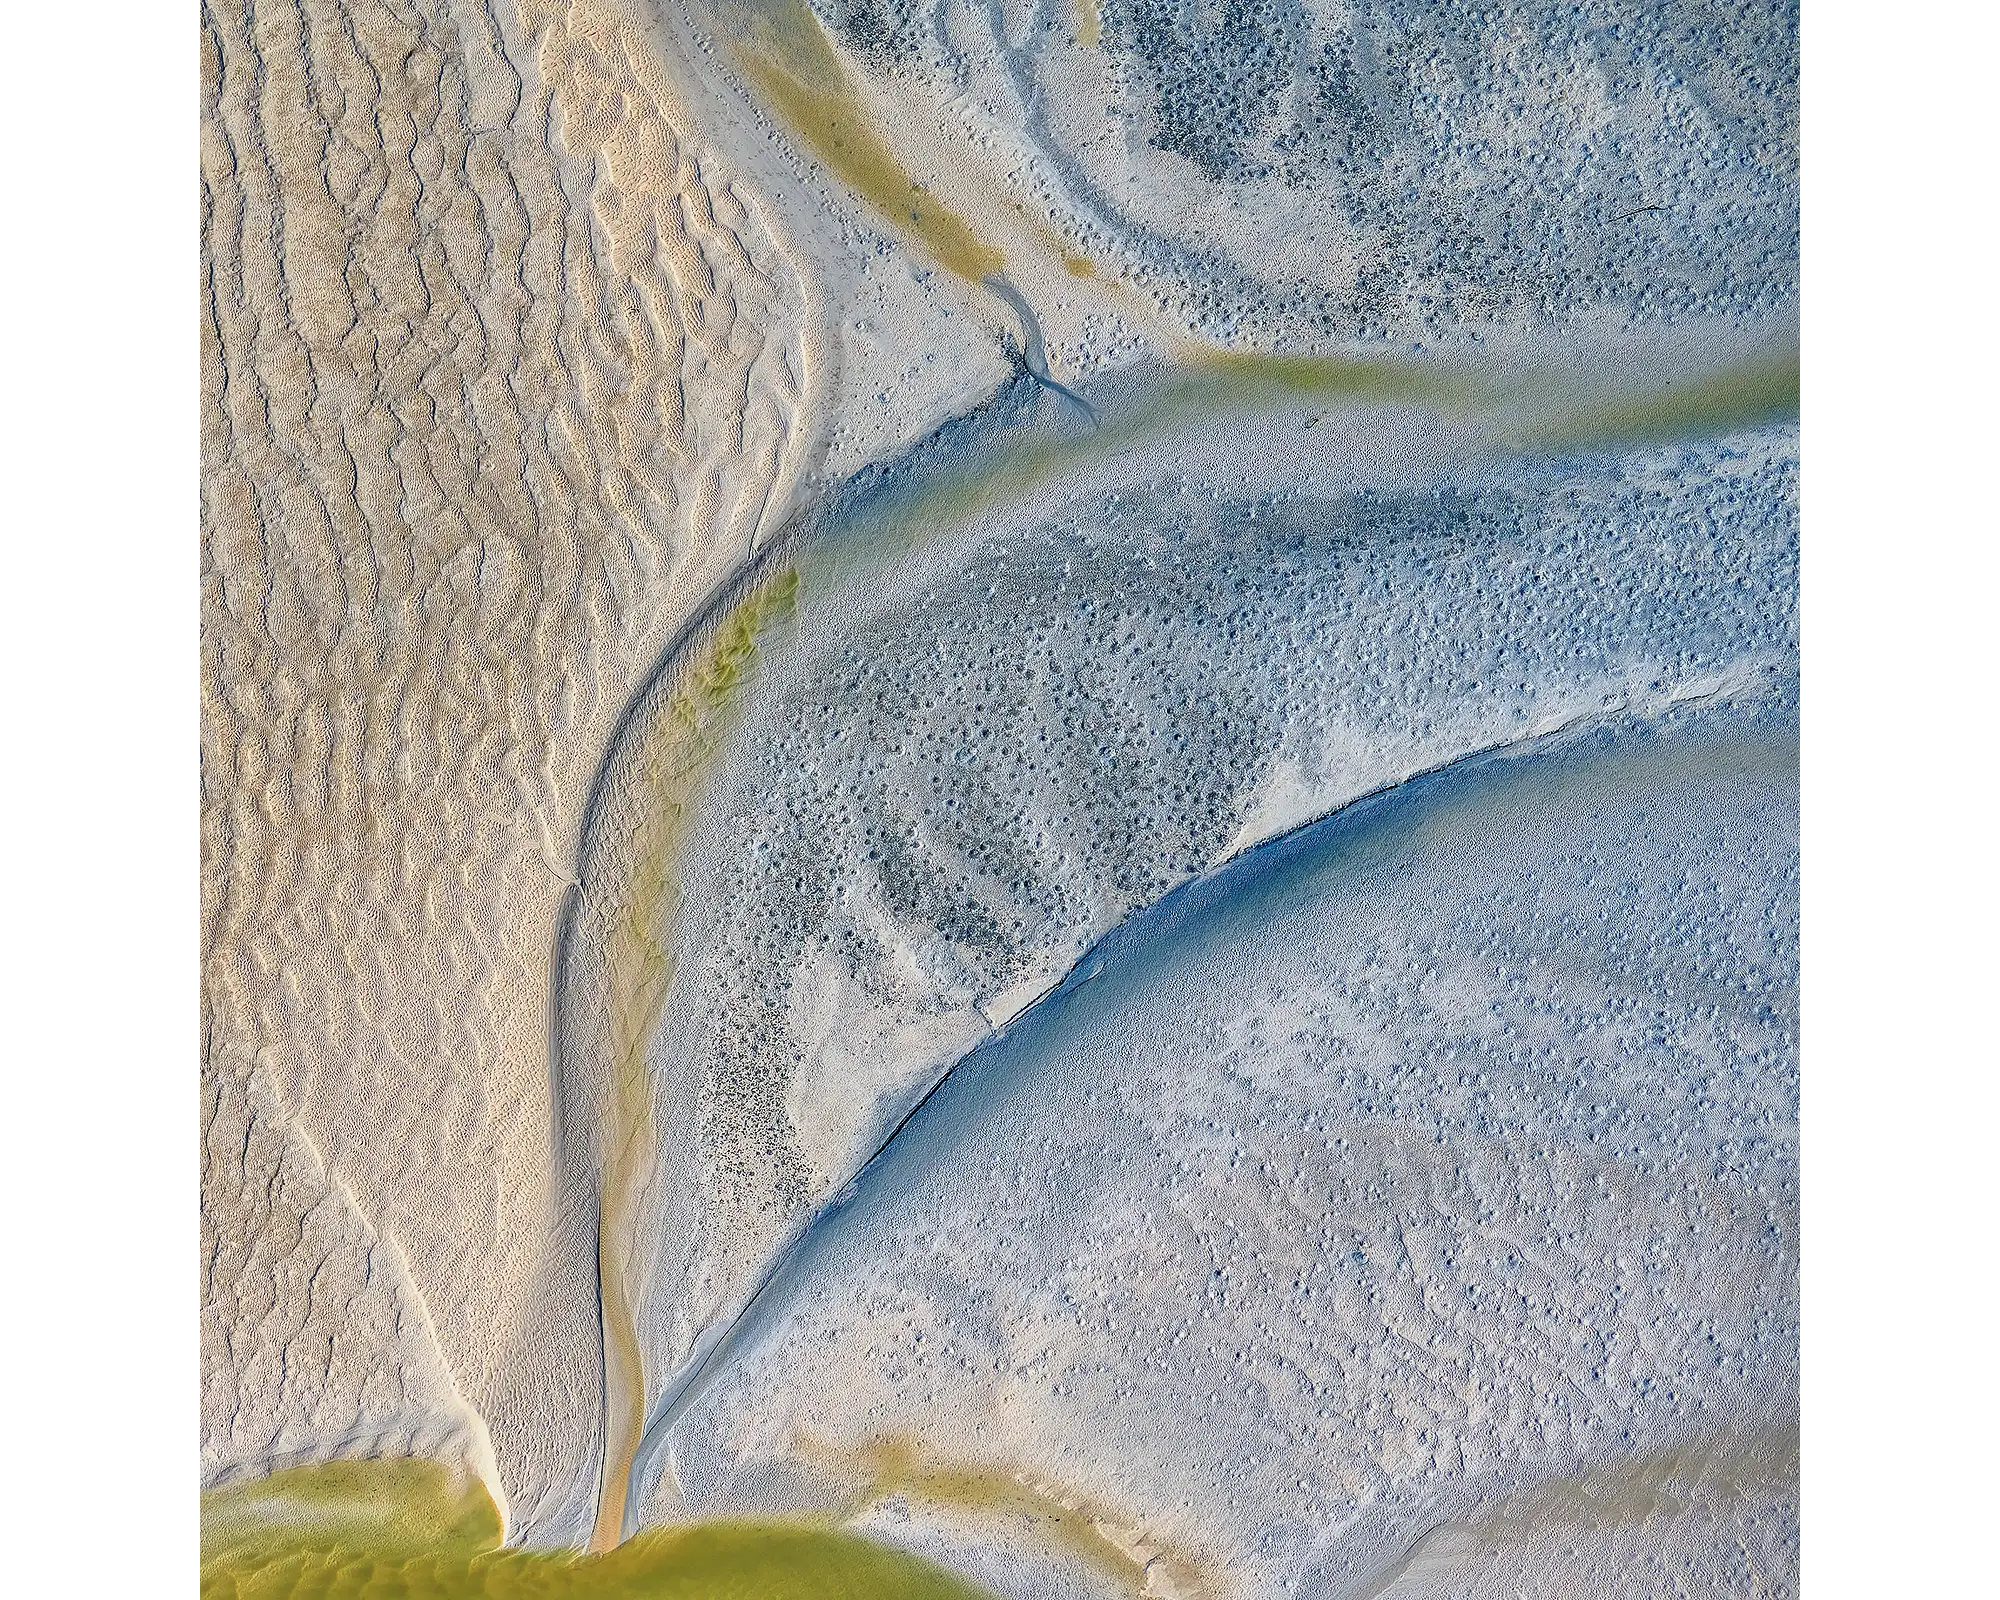 Tidal sands viewed from above, Willie Creek, The Kimberley.